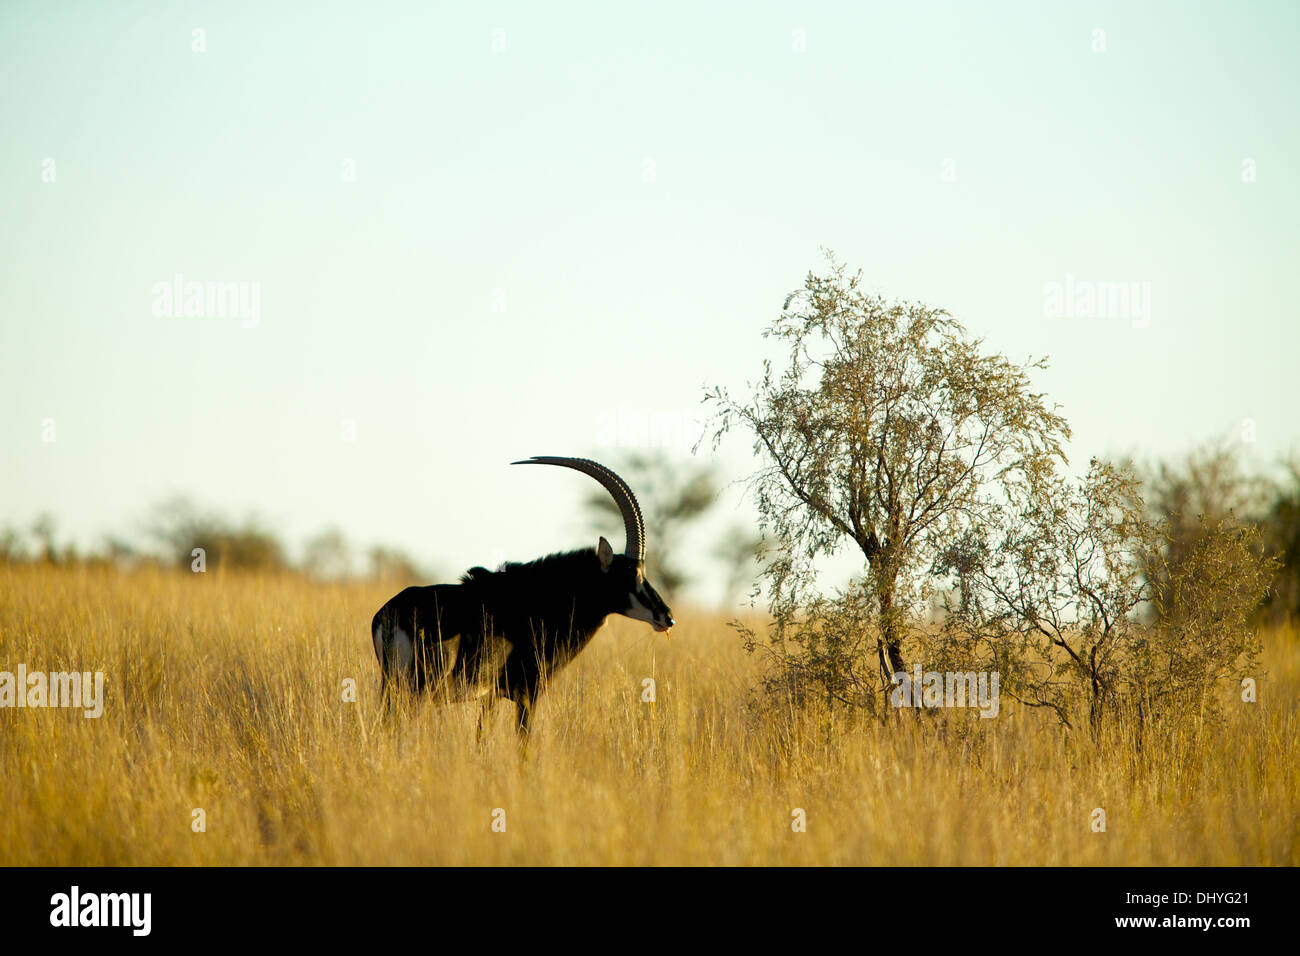 A sable stands in tall golden grass in the Northern Cape of South Africa Stock Photo